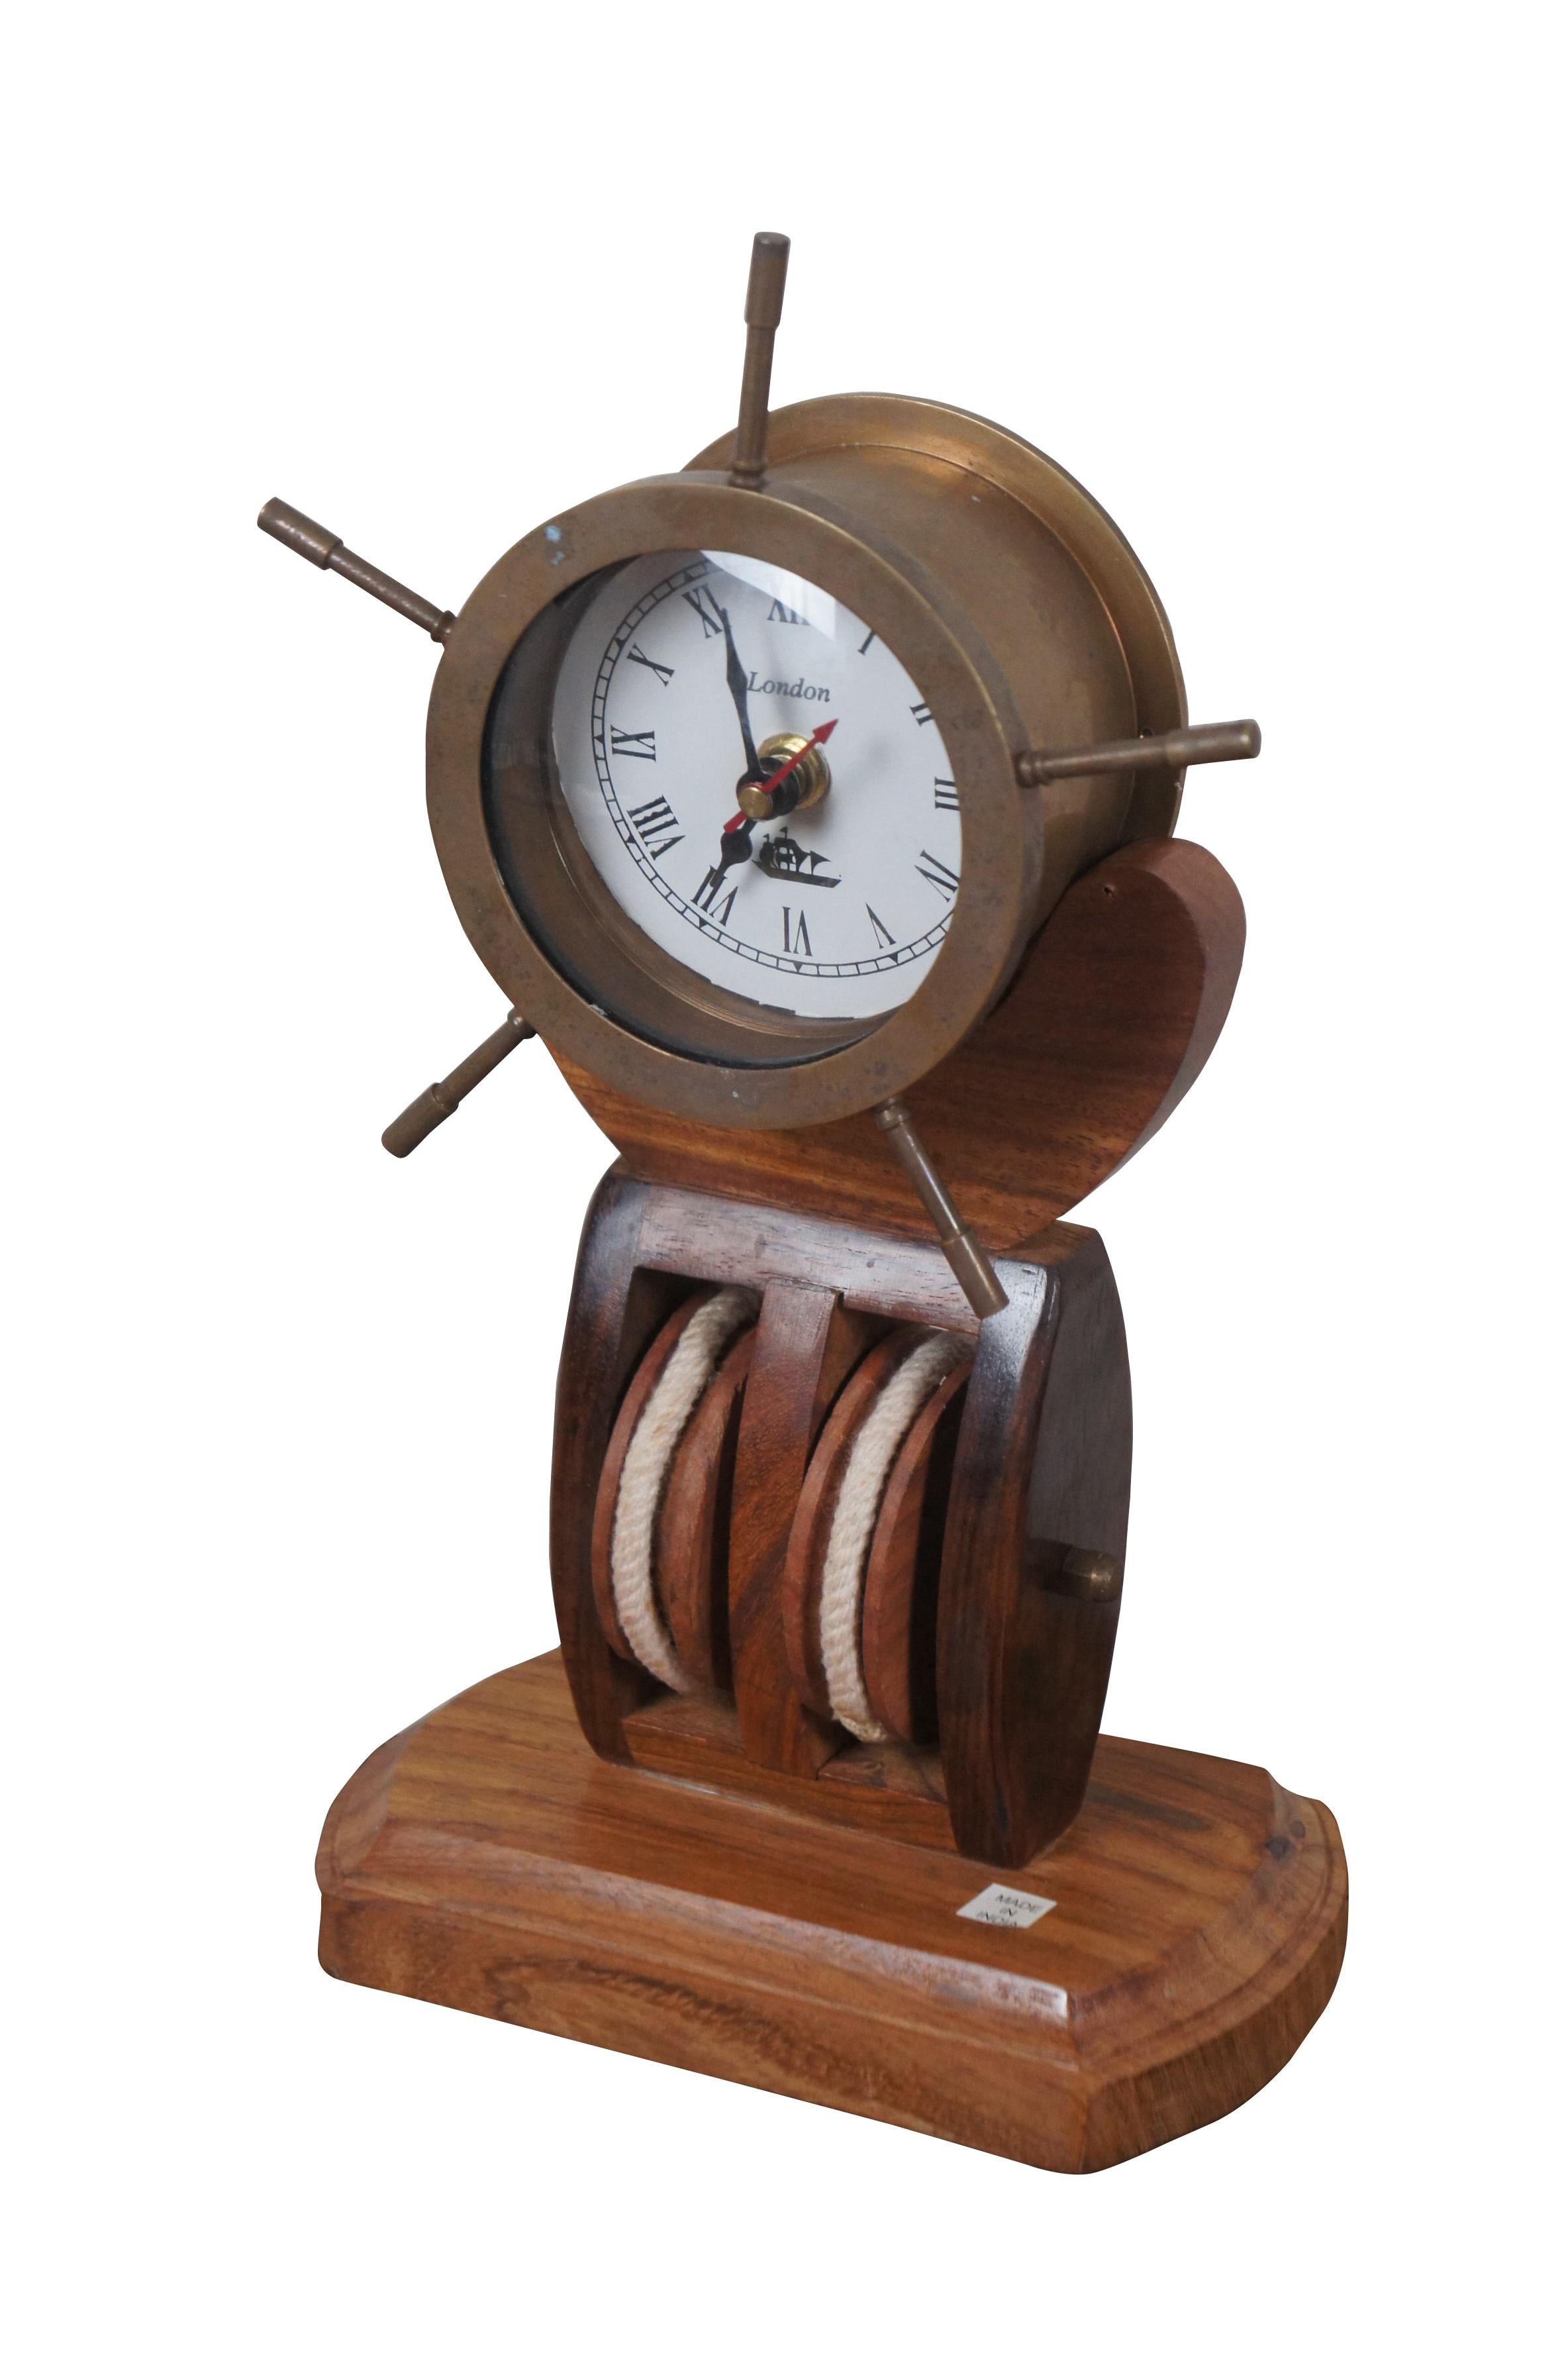 Late 20th century desk clock in the shape of a brass ship's wheel / helm, mounted on a wooden double pulley base. White face with Roman numerals, marked London. Prestige Quartz battery operated movement. Made in India. 

Dimensions:
6.75